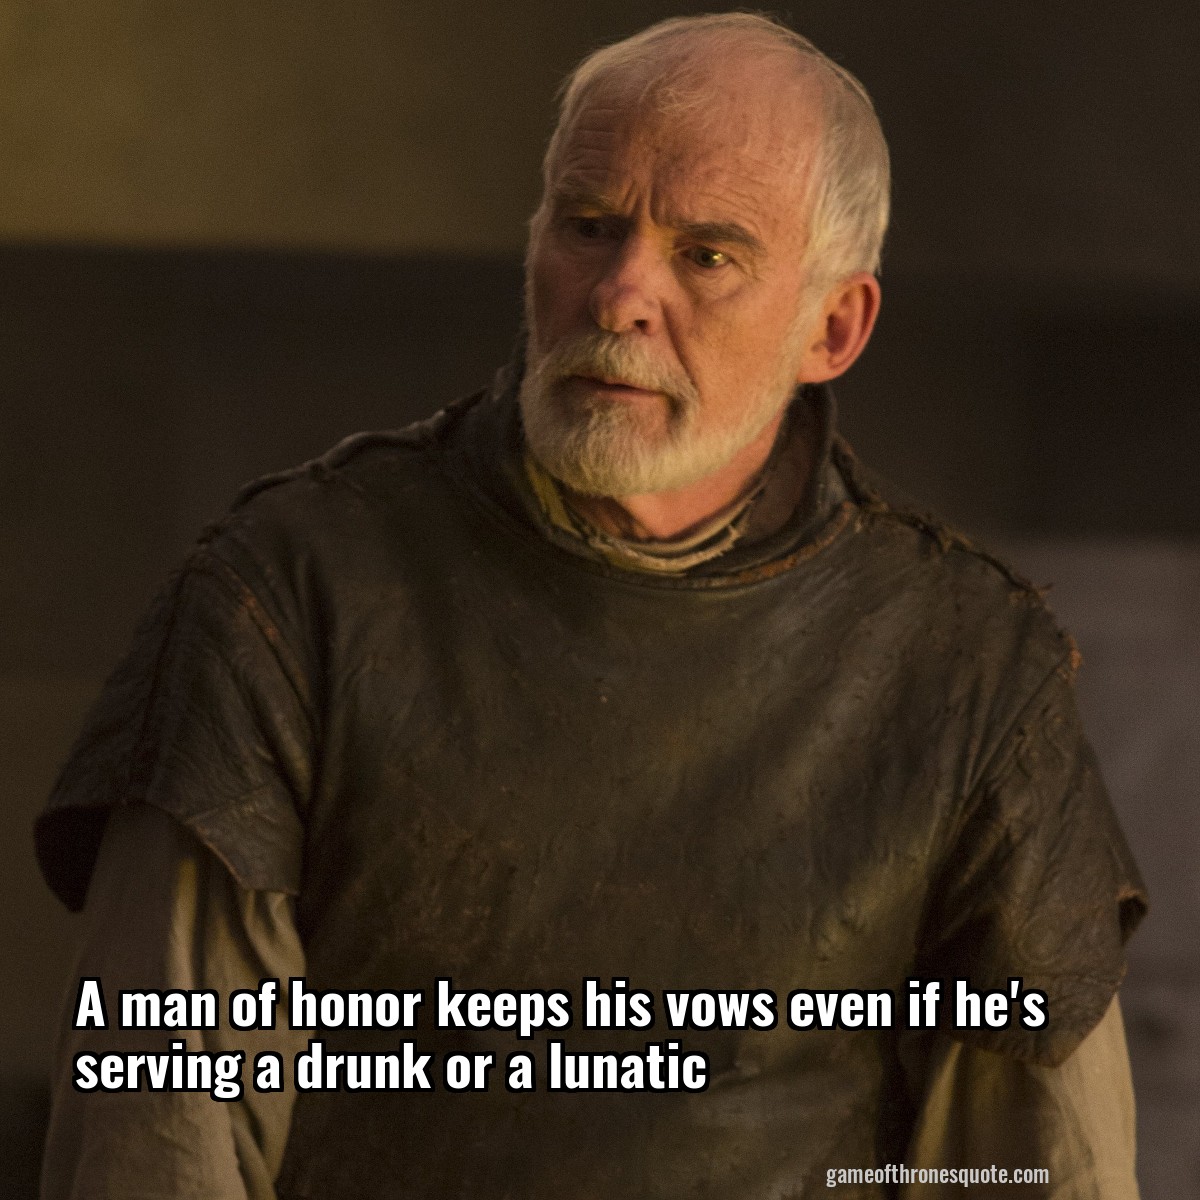 A man of honor keeps his vows even if he's serving a drunk or a lunatic